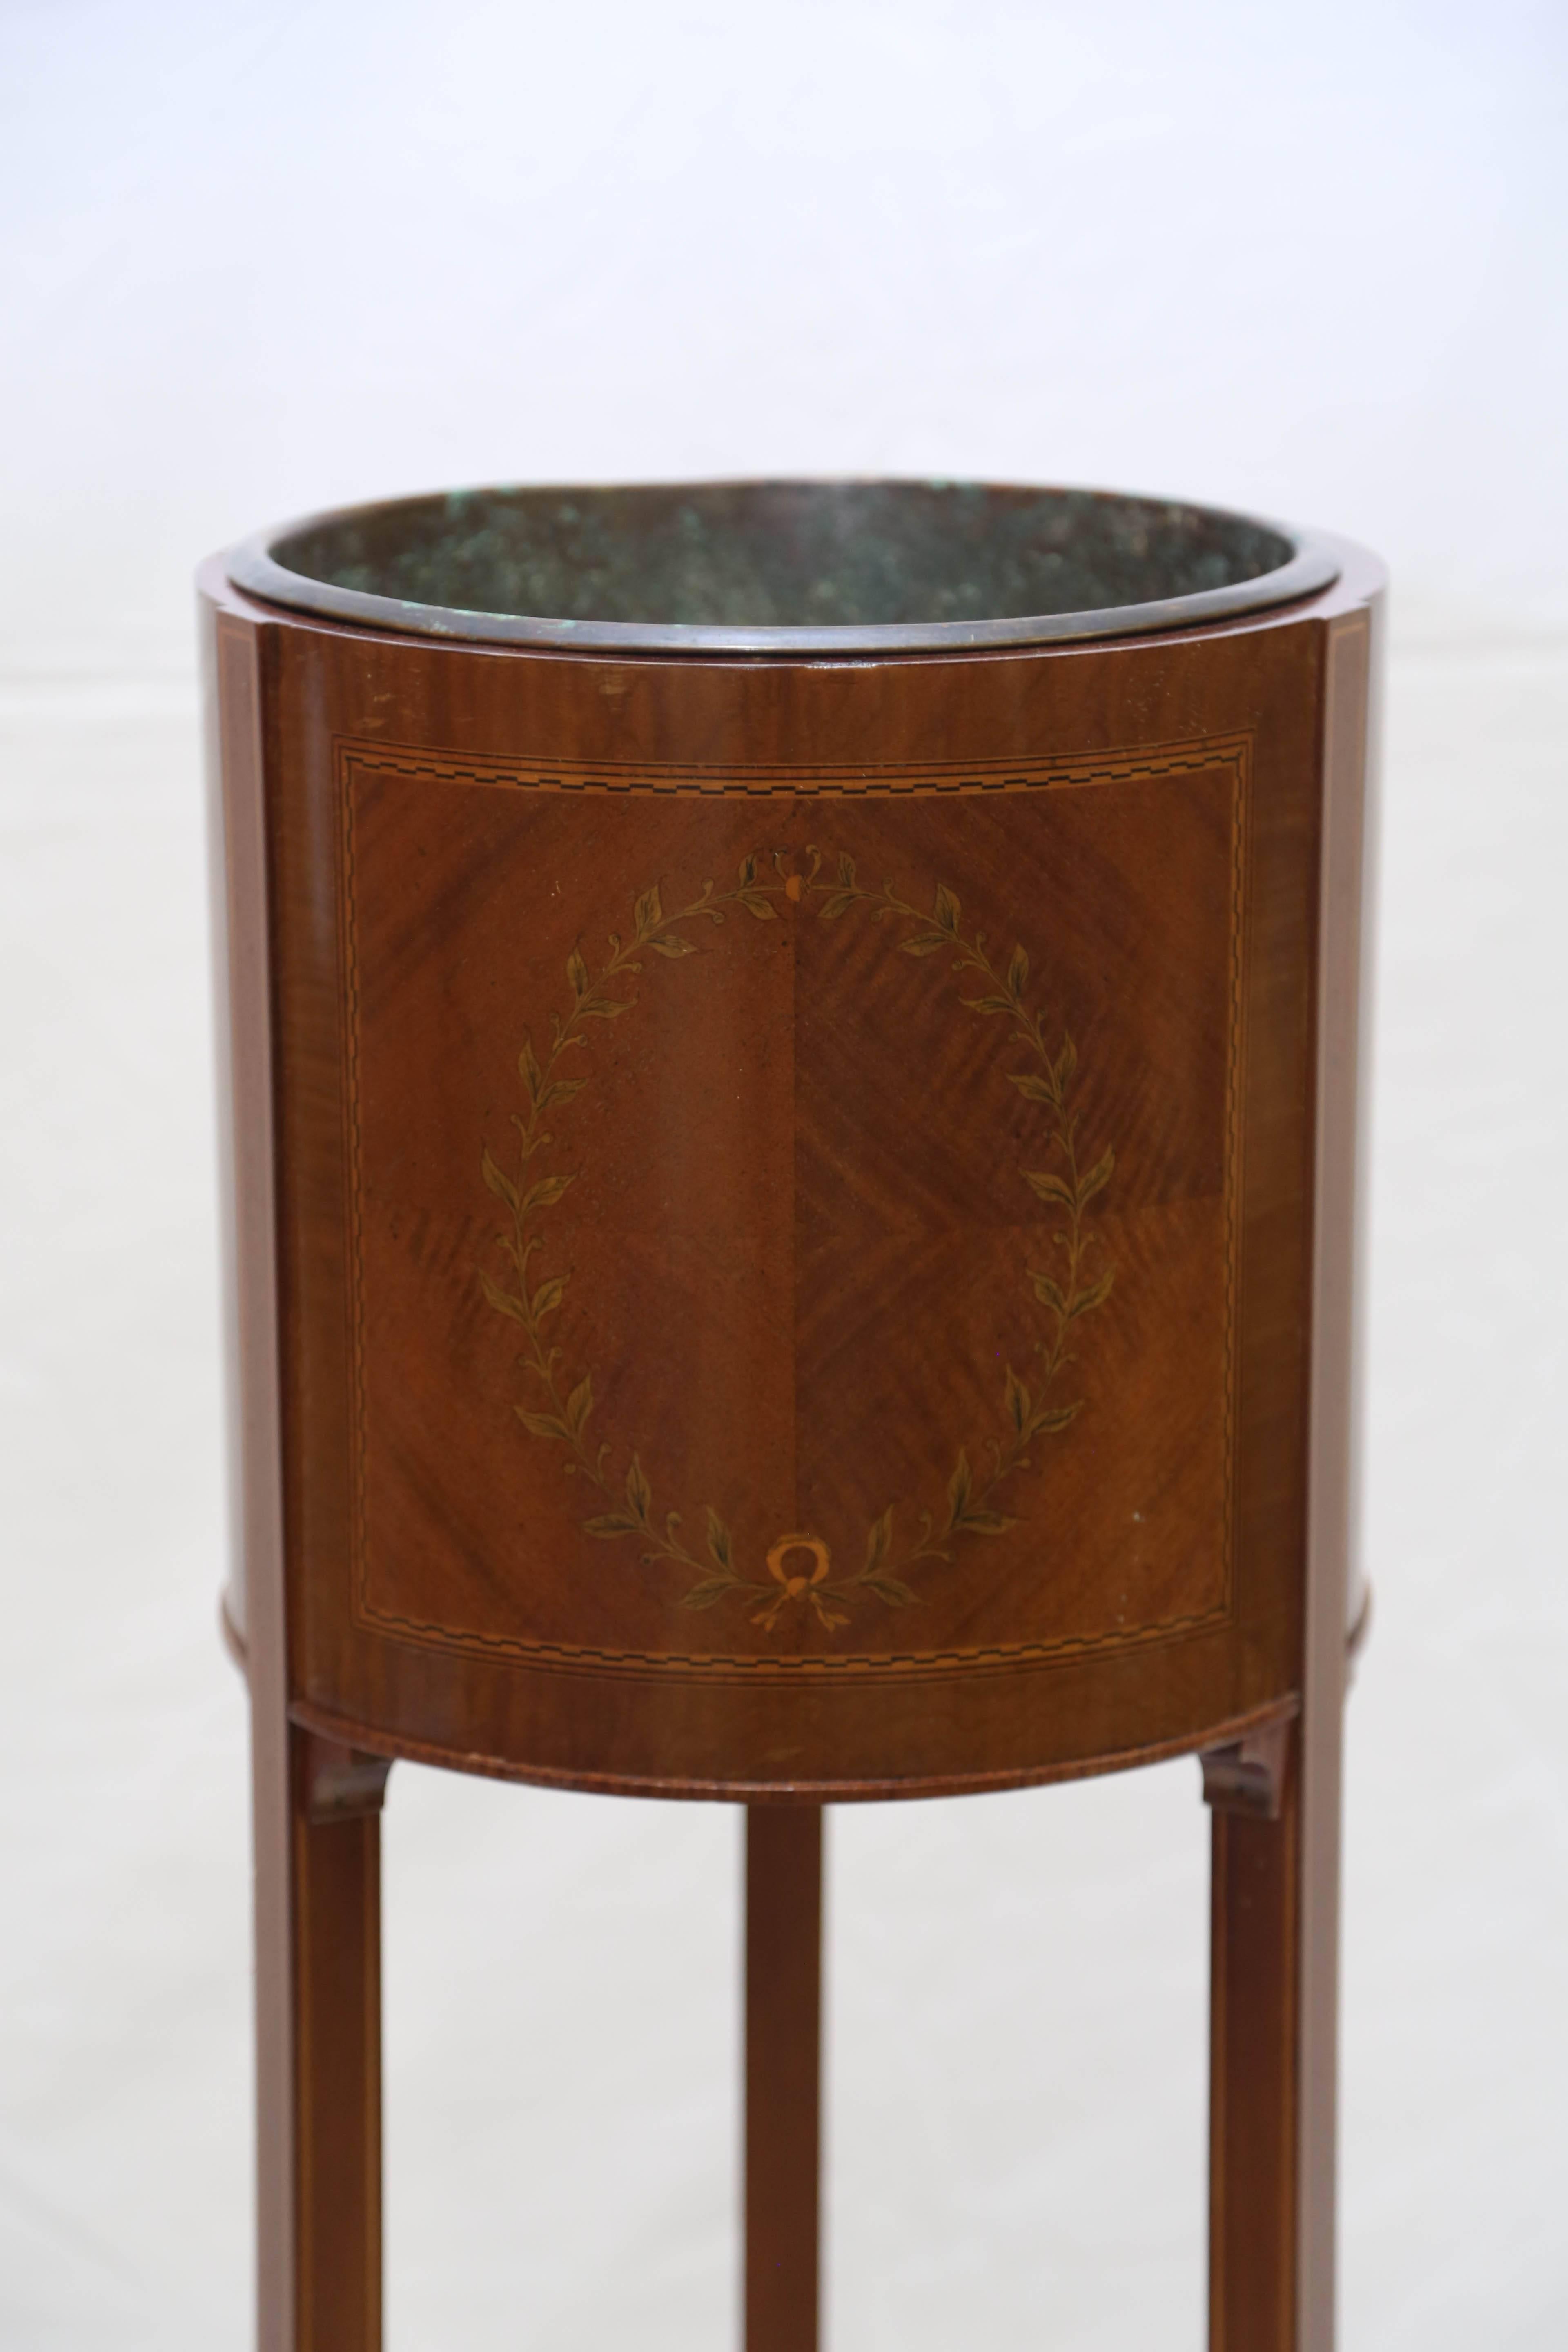 The mahogany stand inlaid with a ribbon-tied laurel wreath with checkerboard banding on a quarter-veneered ground; on tapering splayed legs joined by a stretcher; incorporating a 10